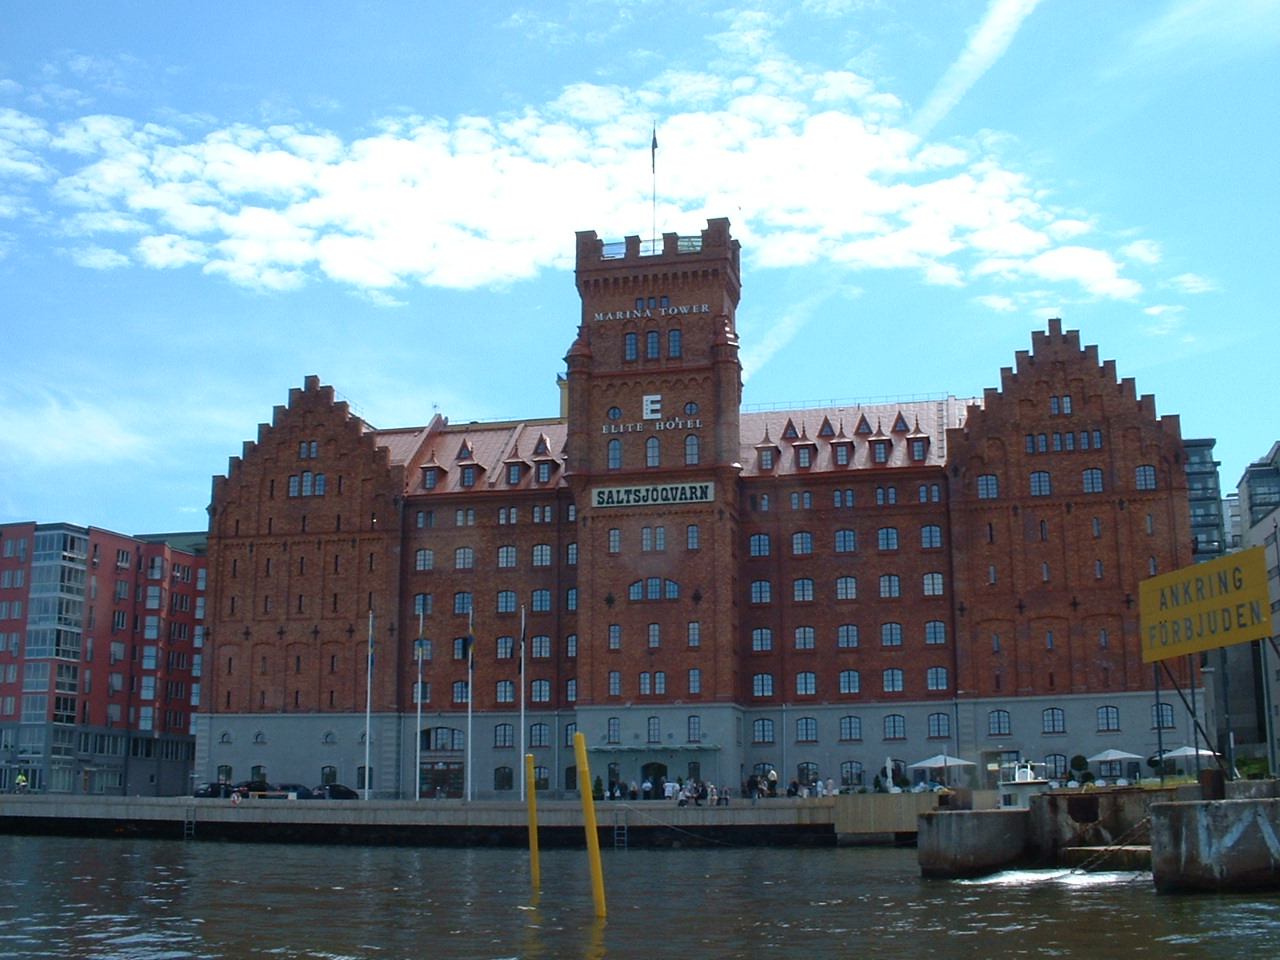 Old brewery - Stockholm